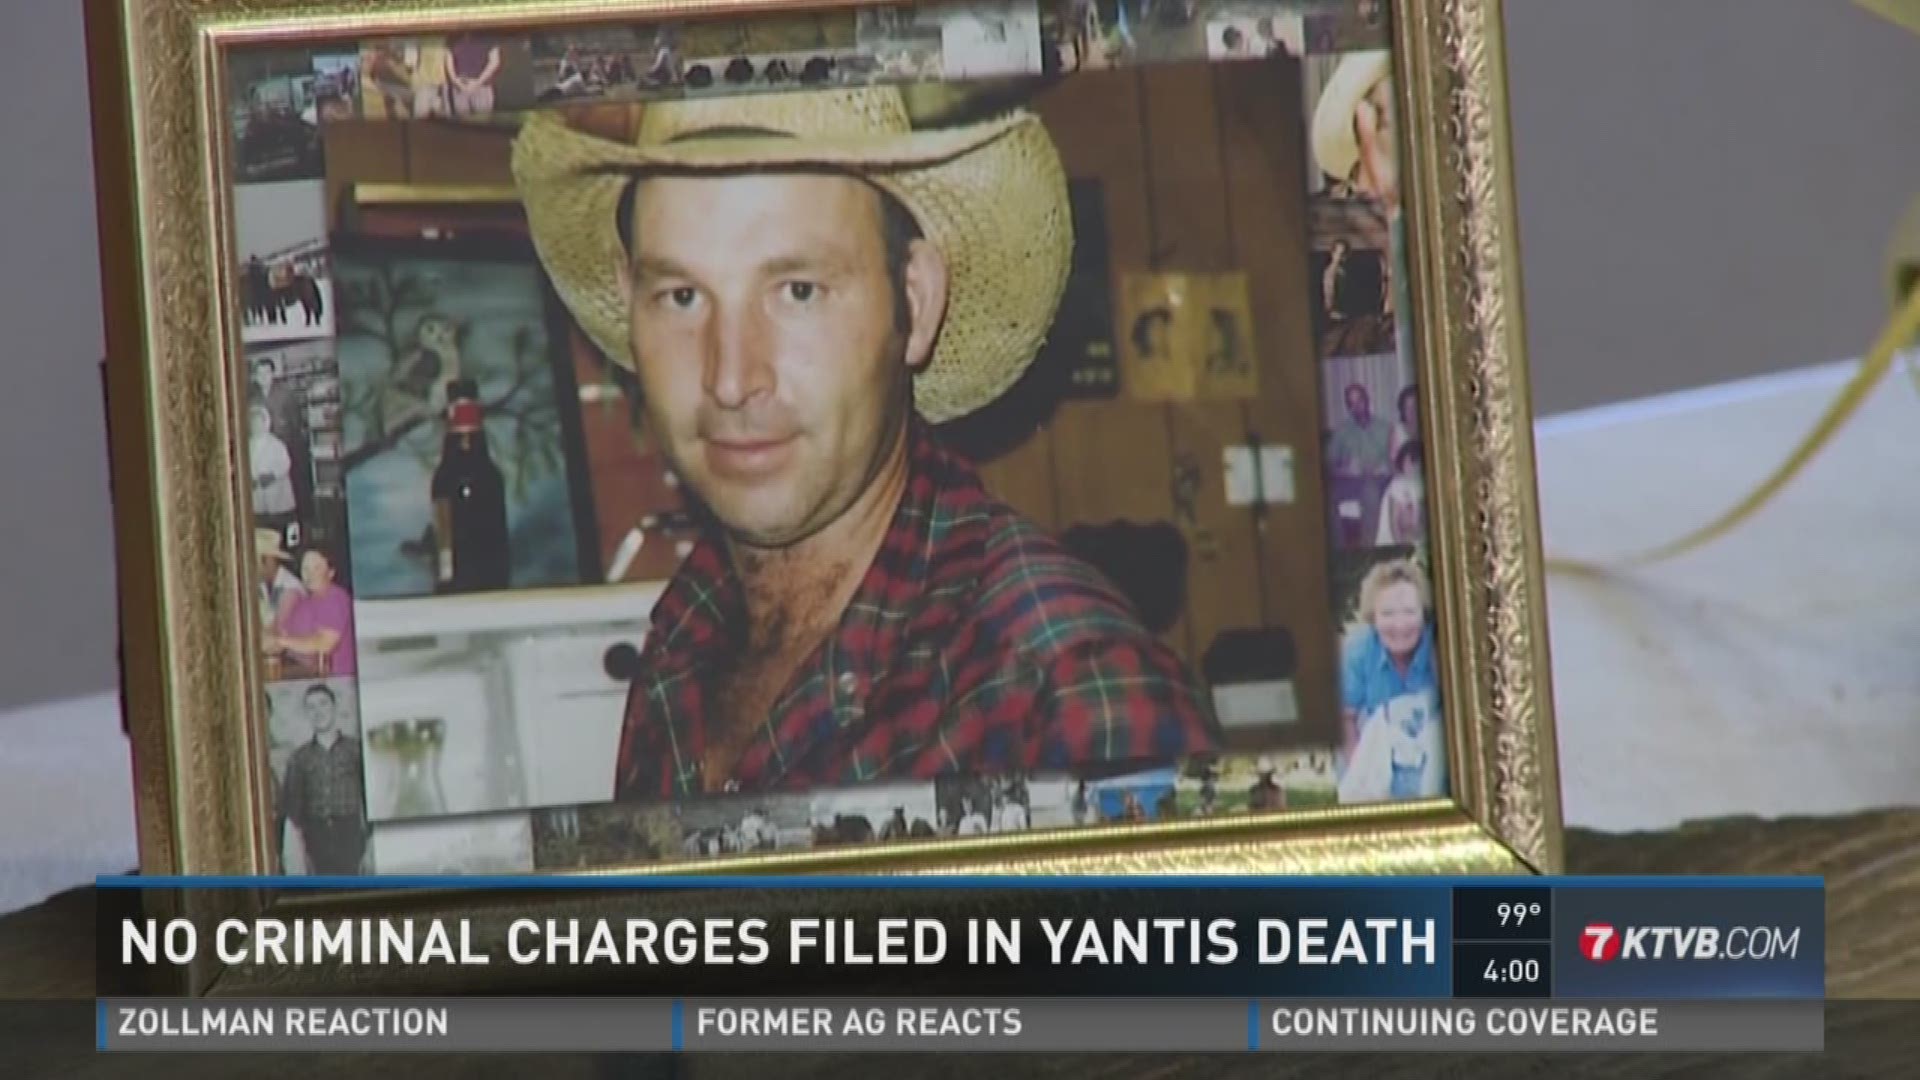 No criminal charges filed in Yantis death.